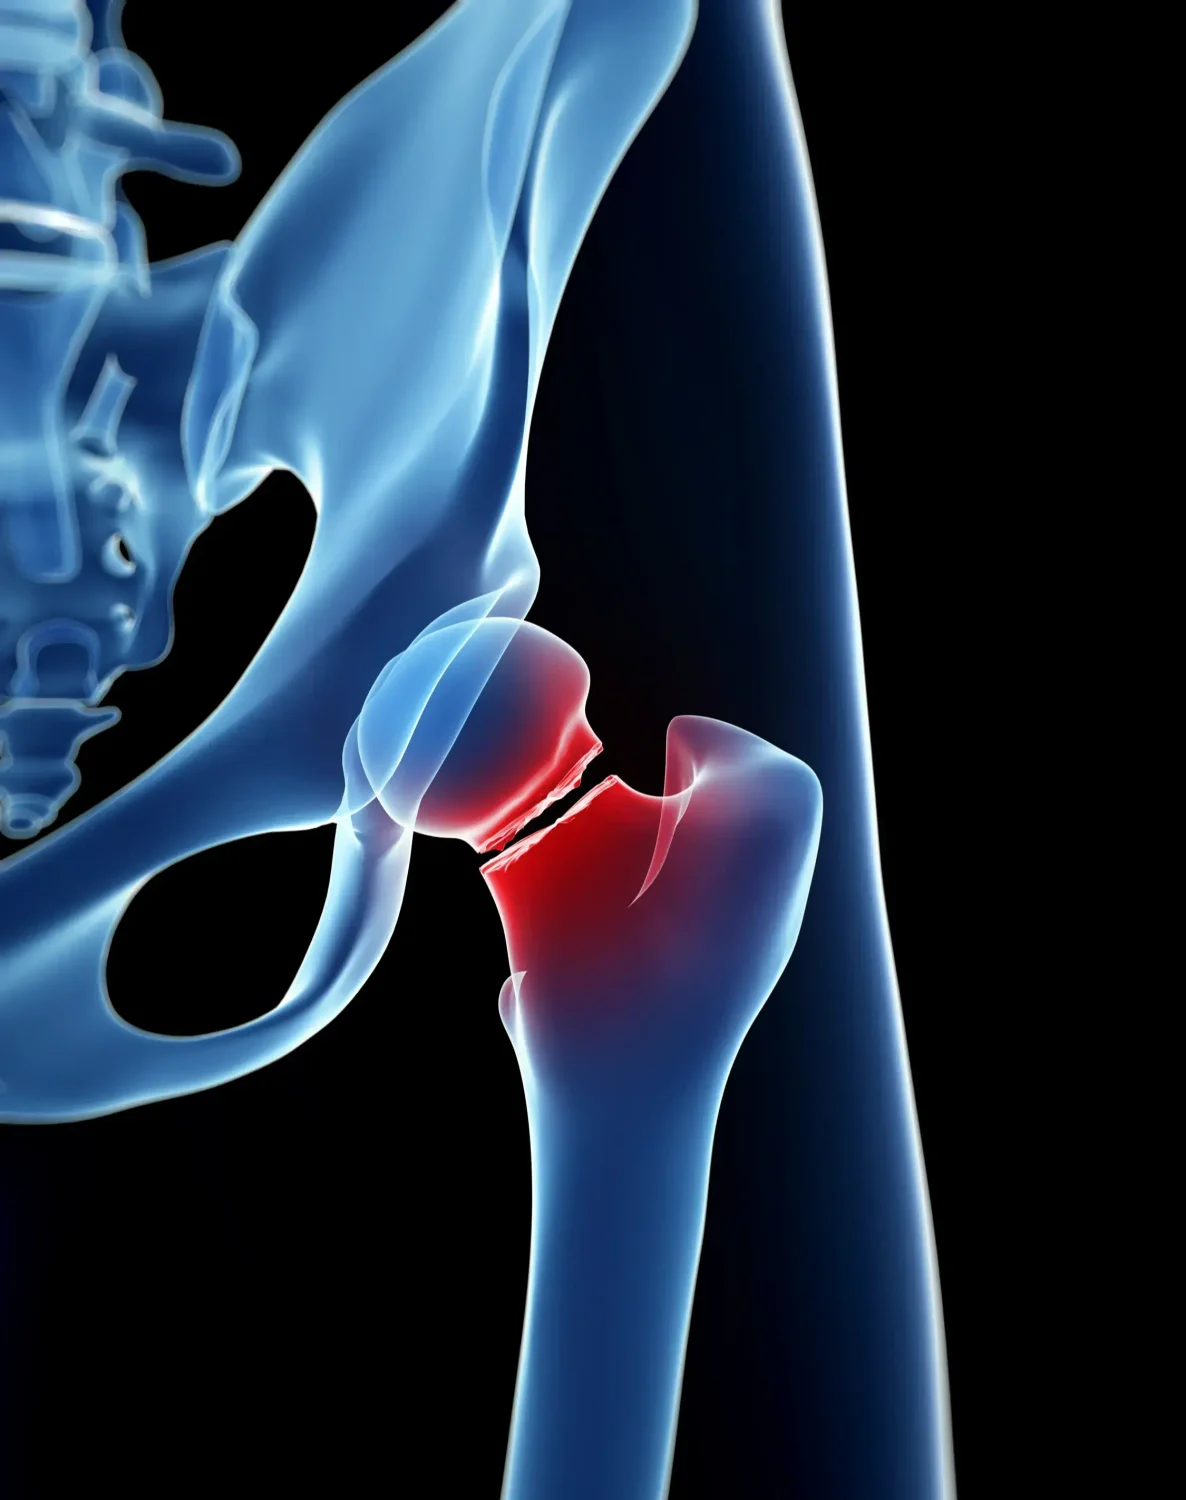 Graphic showing the femoral neck of a broken hip glowing in red.